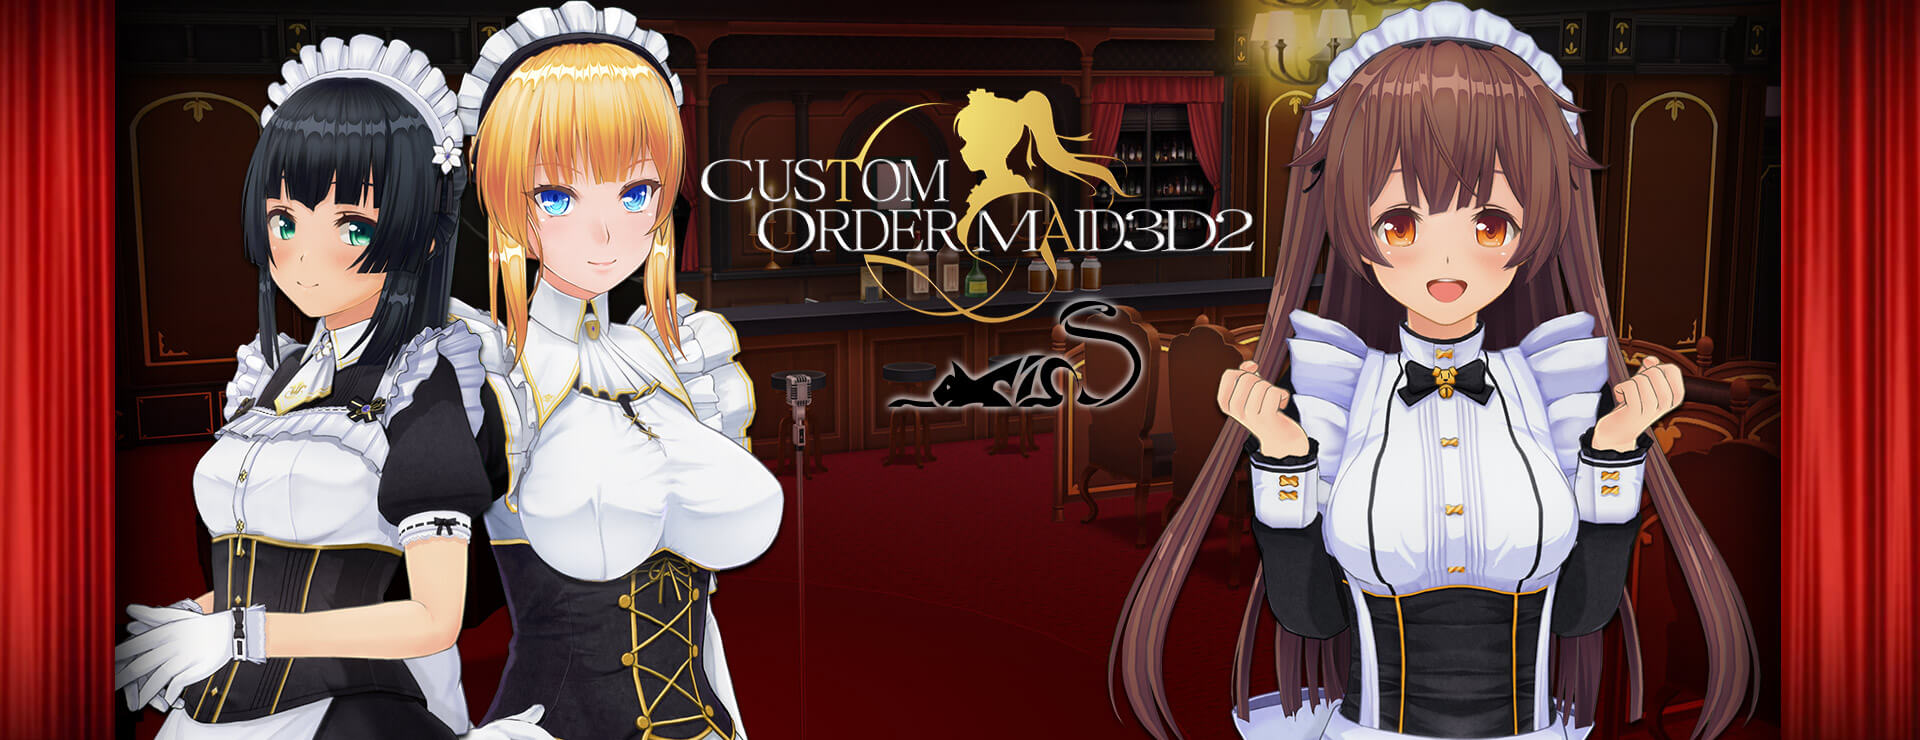 Custom Order Maid 3D 2: Happy New Year Lucky Bag 2024 type Adult - Simulation Spiel